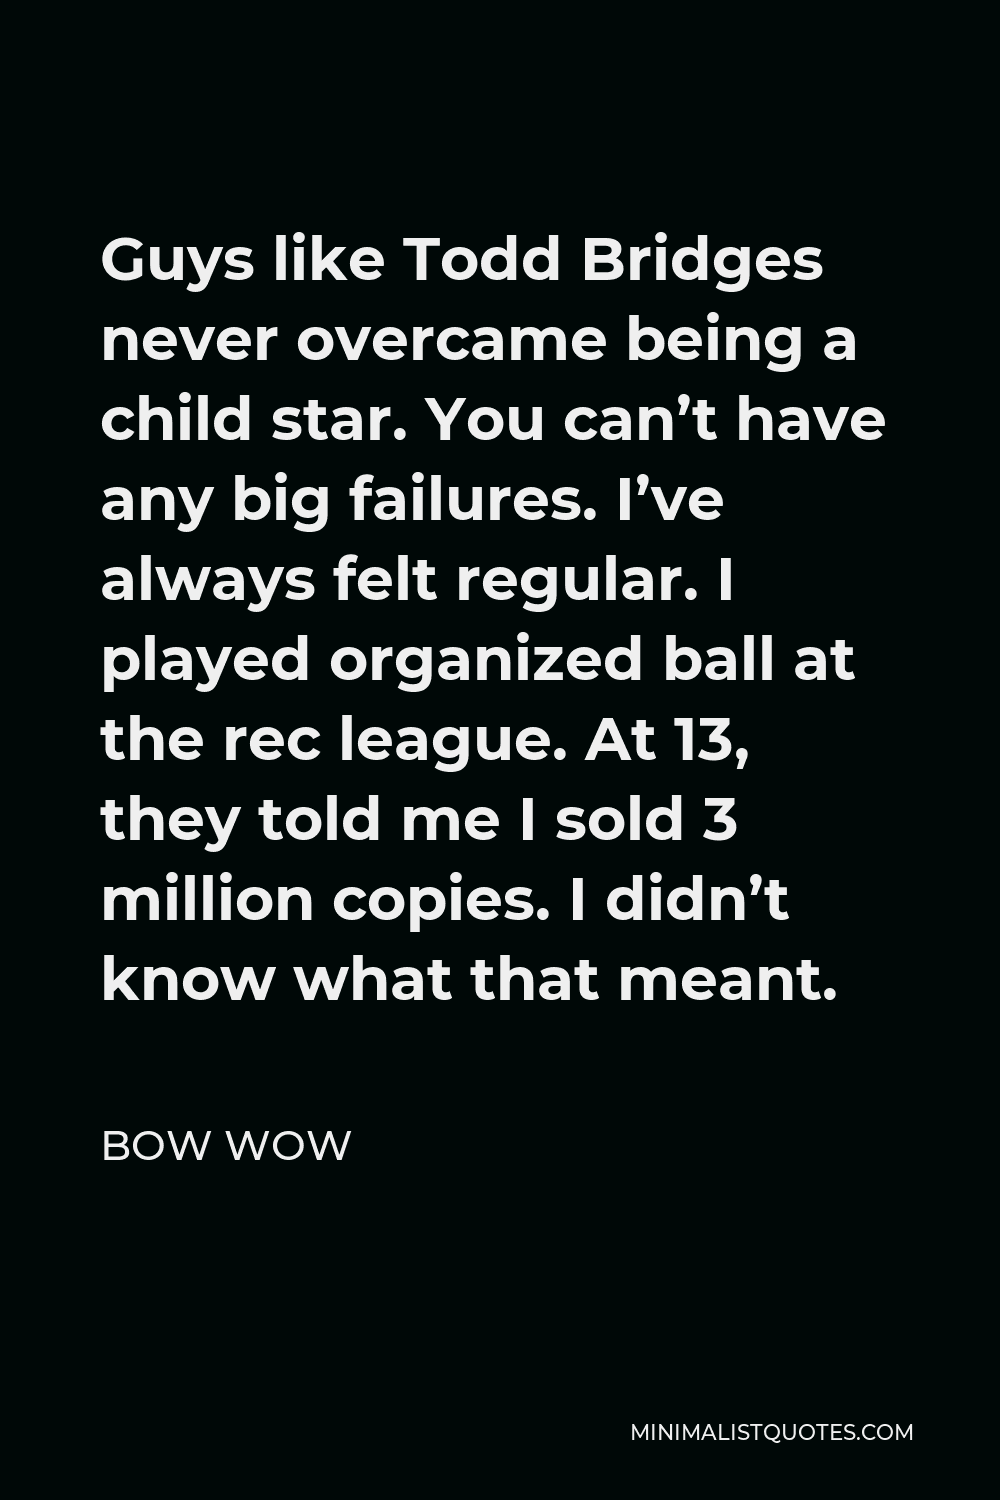 Bow Wow Quote - Guys like Todd Bridges never overcame being a child star. You can’t have any big failures. I’ve always felt regular. I played organized ball at the rec league. At 13, they told me I sold 3 million copies. I didn’t know what that meant.